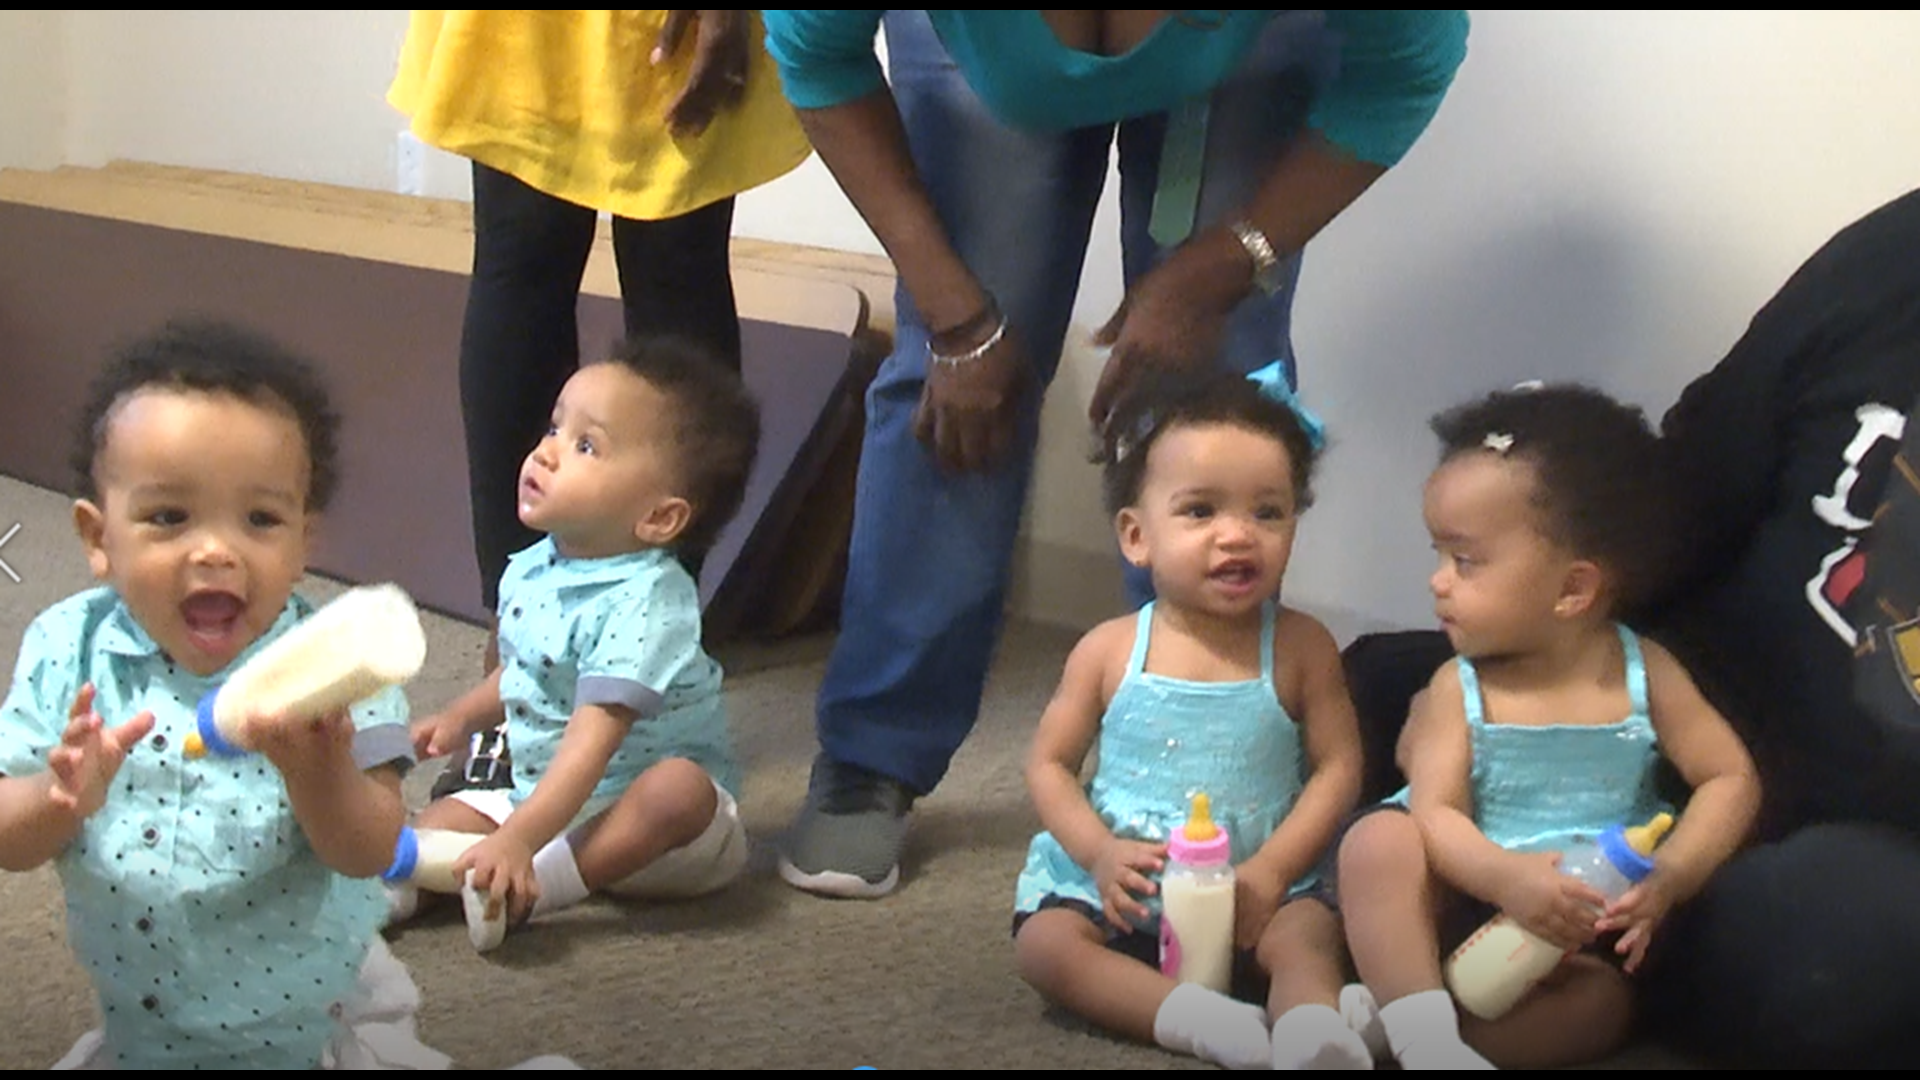 Last year, a Waco mom went to the hospital expecting to deliver triplets. She was surprised to learn there was a fourth baby.

Tuesday, the quadruplets turned 1, and KCEN Channel 6 was invited to spend time with them as they celebrated their first birthday.